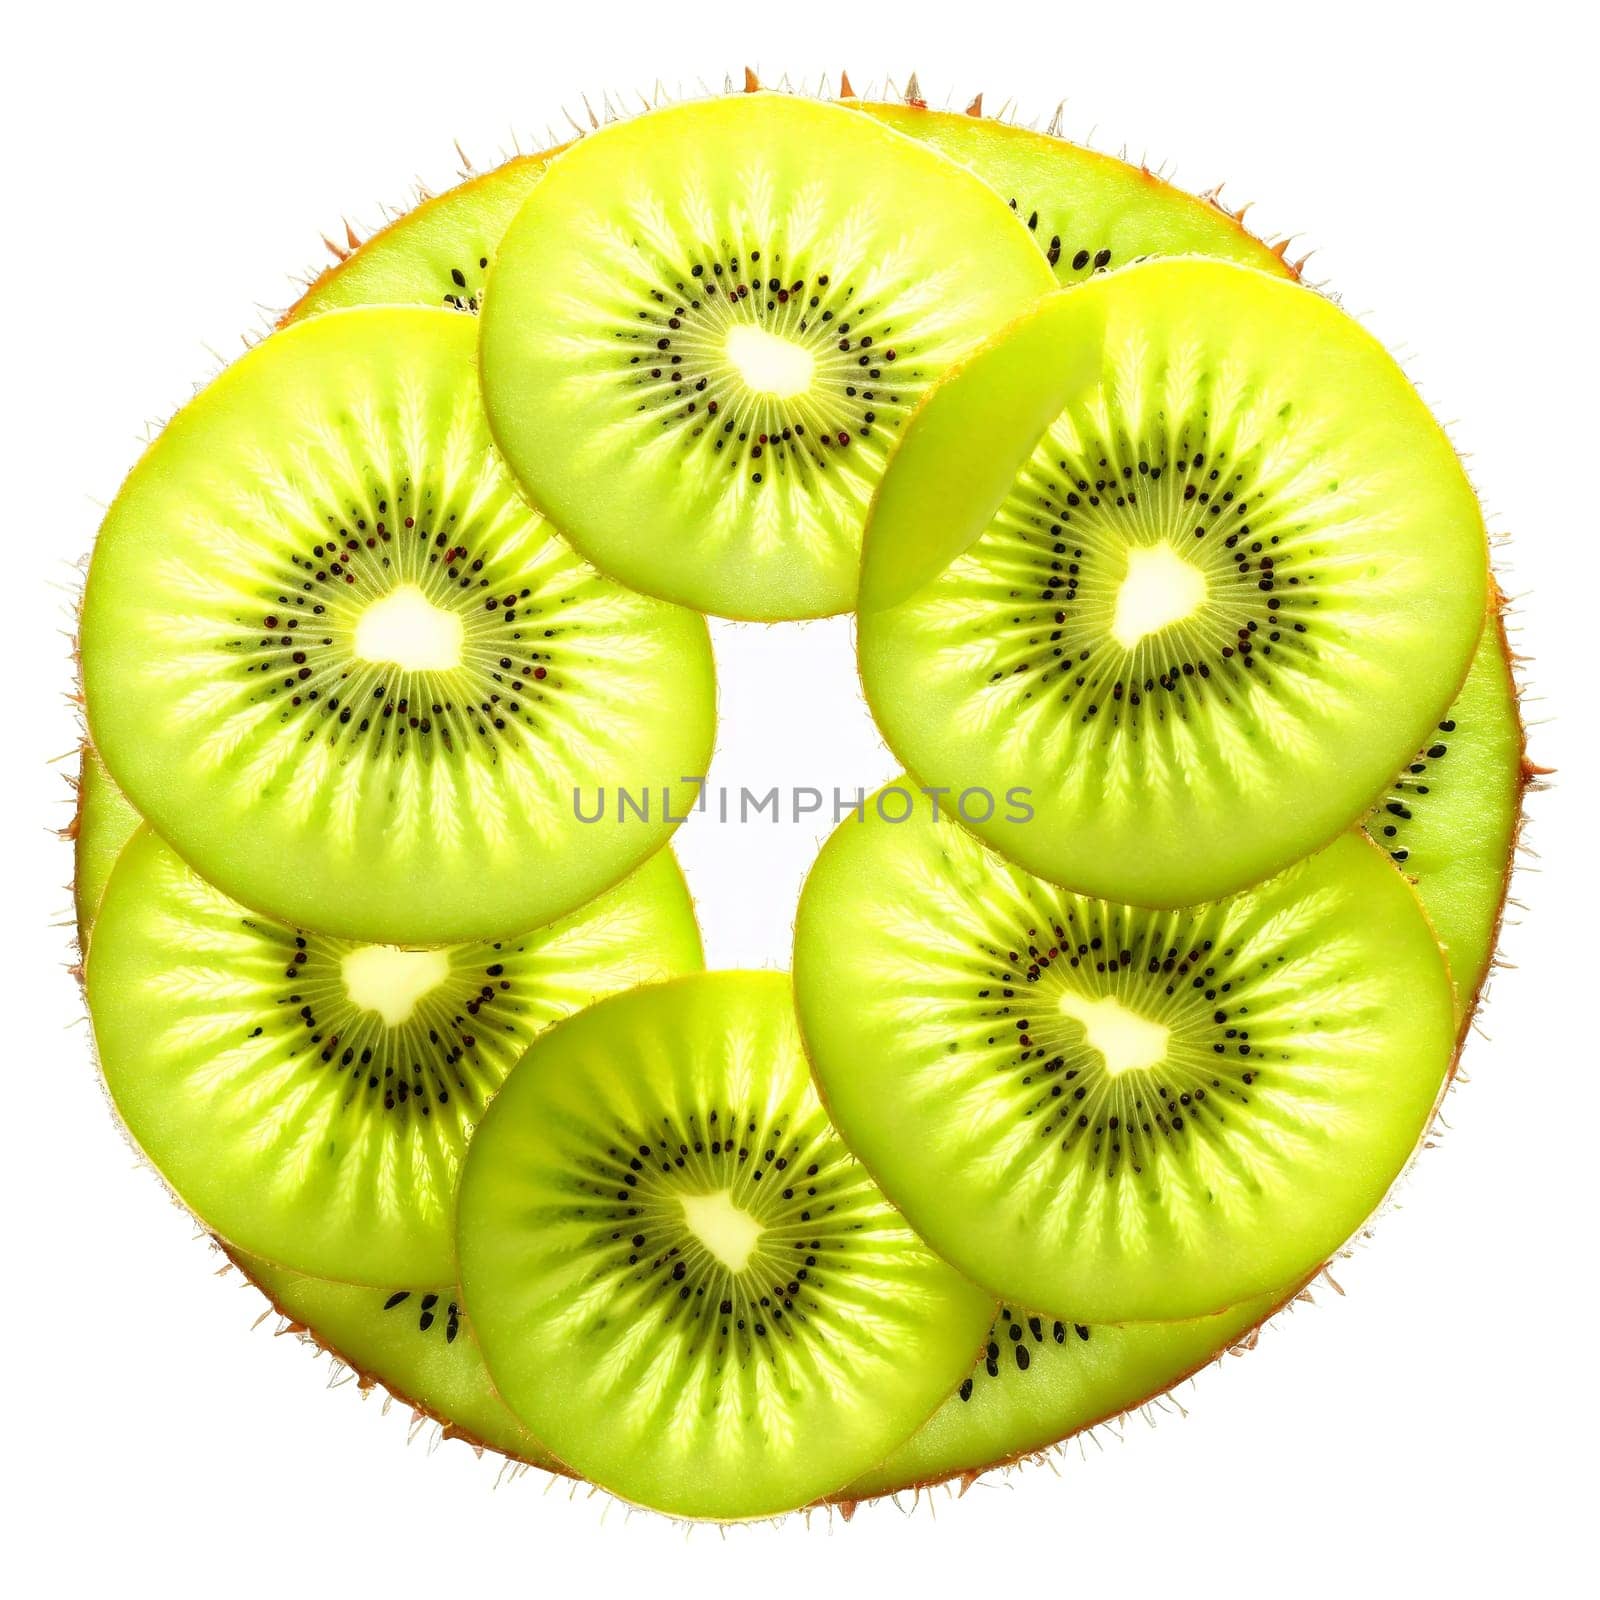 Kiwi Starburst Shape Vibrant green kiwi slices arranged in a starburst pattern with seeds floating by panophotograph